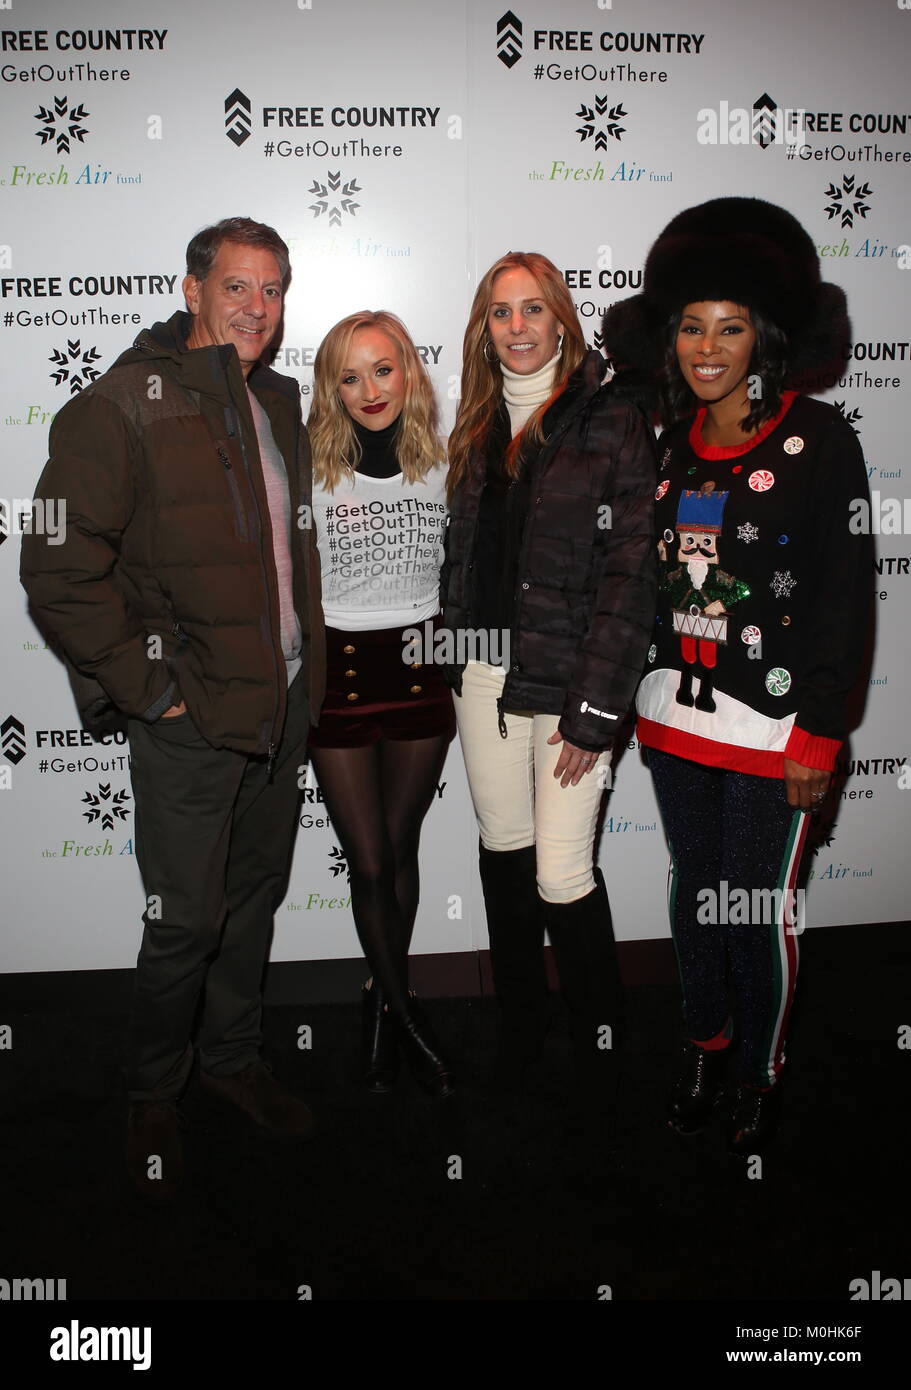 Olympic Medalist Nastia Liukin and Fresh Air Fund Alumna June Ambrose Host Ice Skating Kickoff Event with Fresh Air Fund Families Held at The Polar Lounge at Bryant Park  Featuring: Ira Schwartz, Nastia Liukin, Jody Schwartz  June Ambrose Where: New York, New York, United States When: 19 Dec 2017 Credit: Derrick Salters/WENN.com Stock Photo